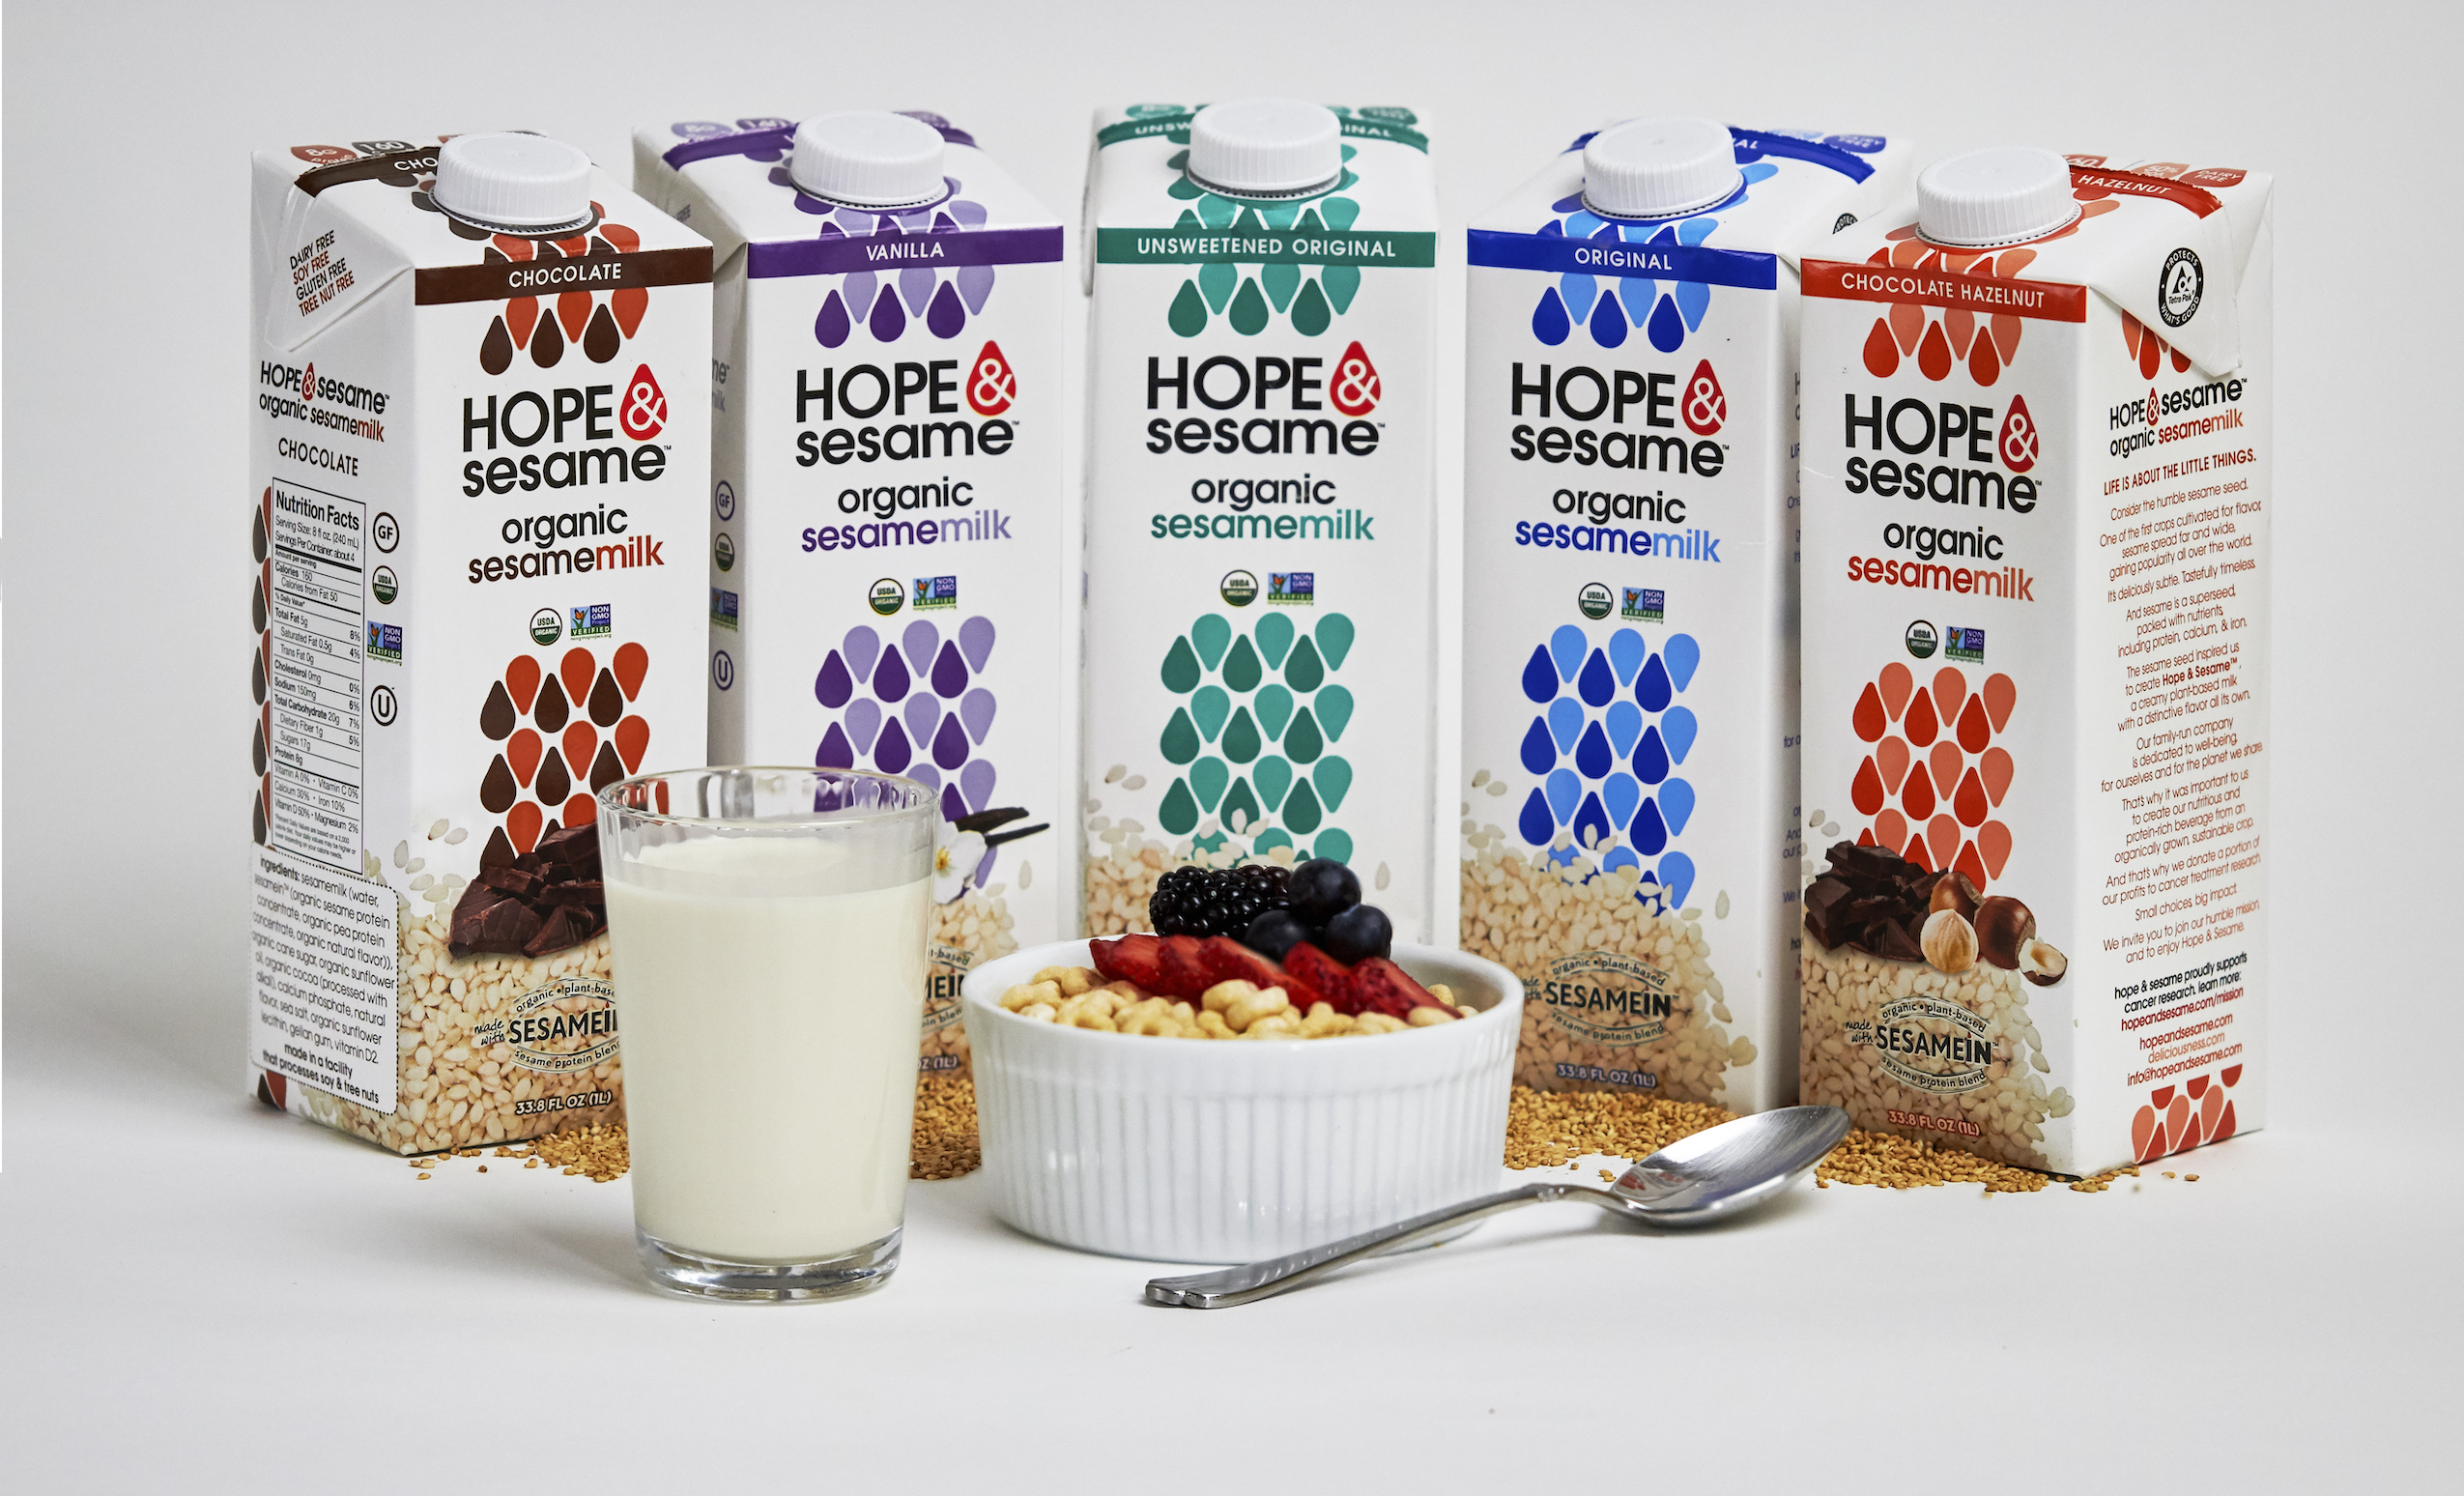 Hope & Sesame is a new line of protein-backed, nondairy sesamemilks.